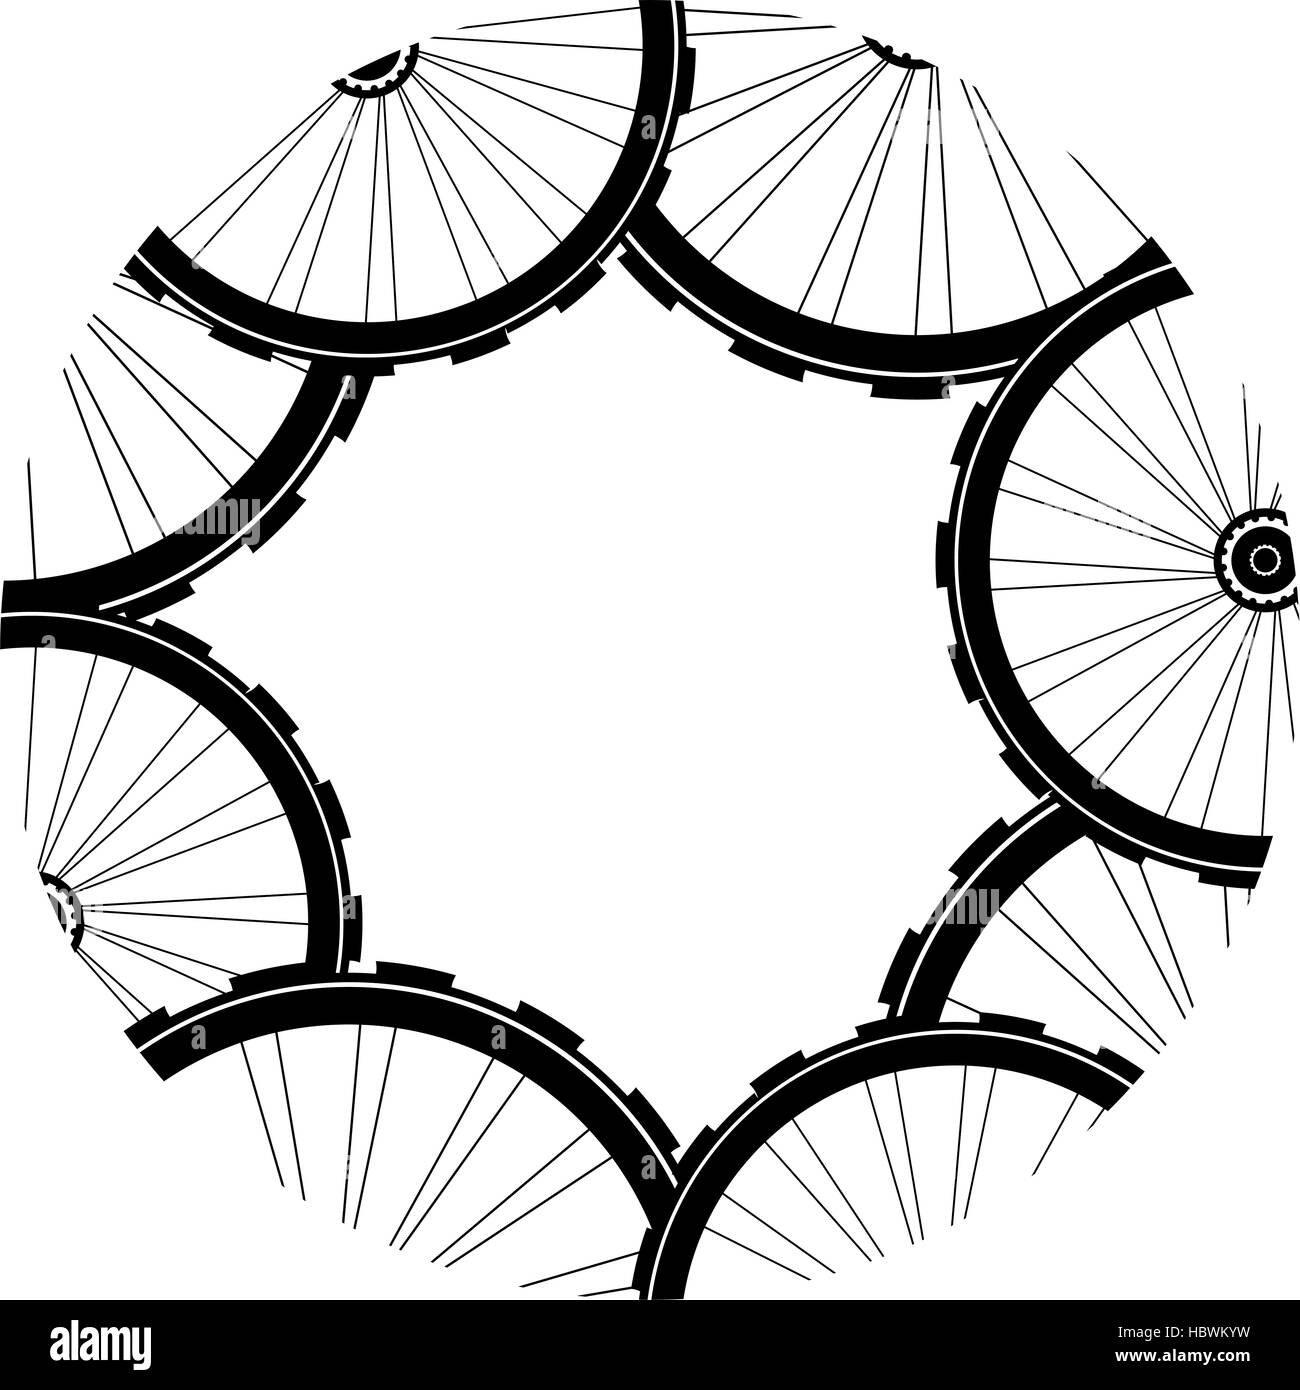 road and mountain bike wheels and tires pattern Stock Photo